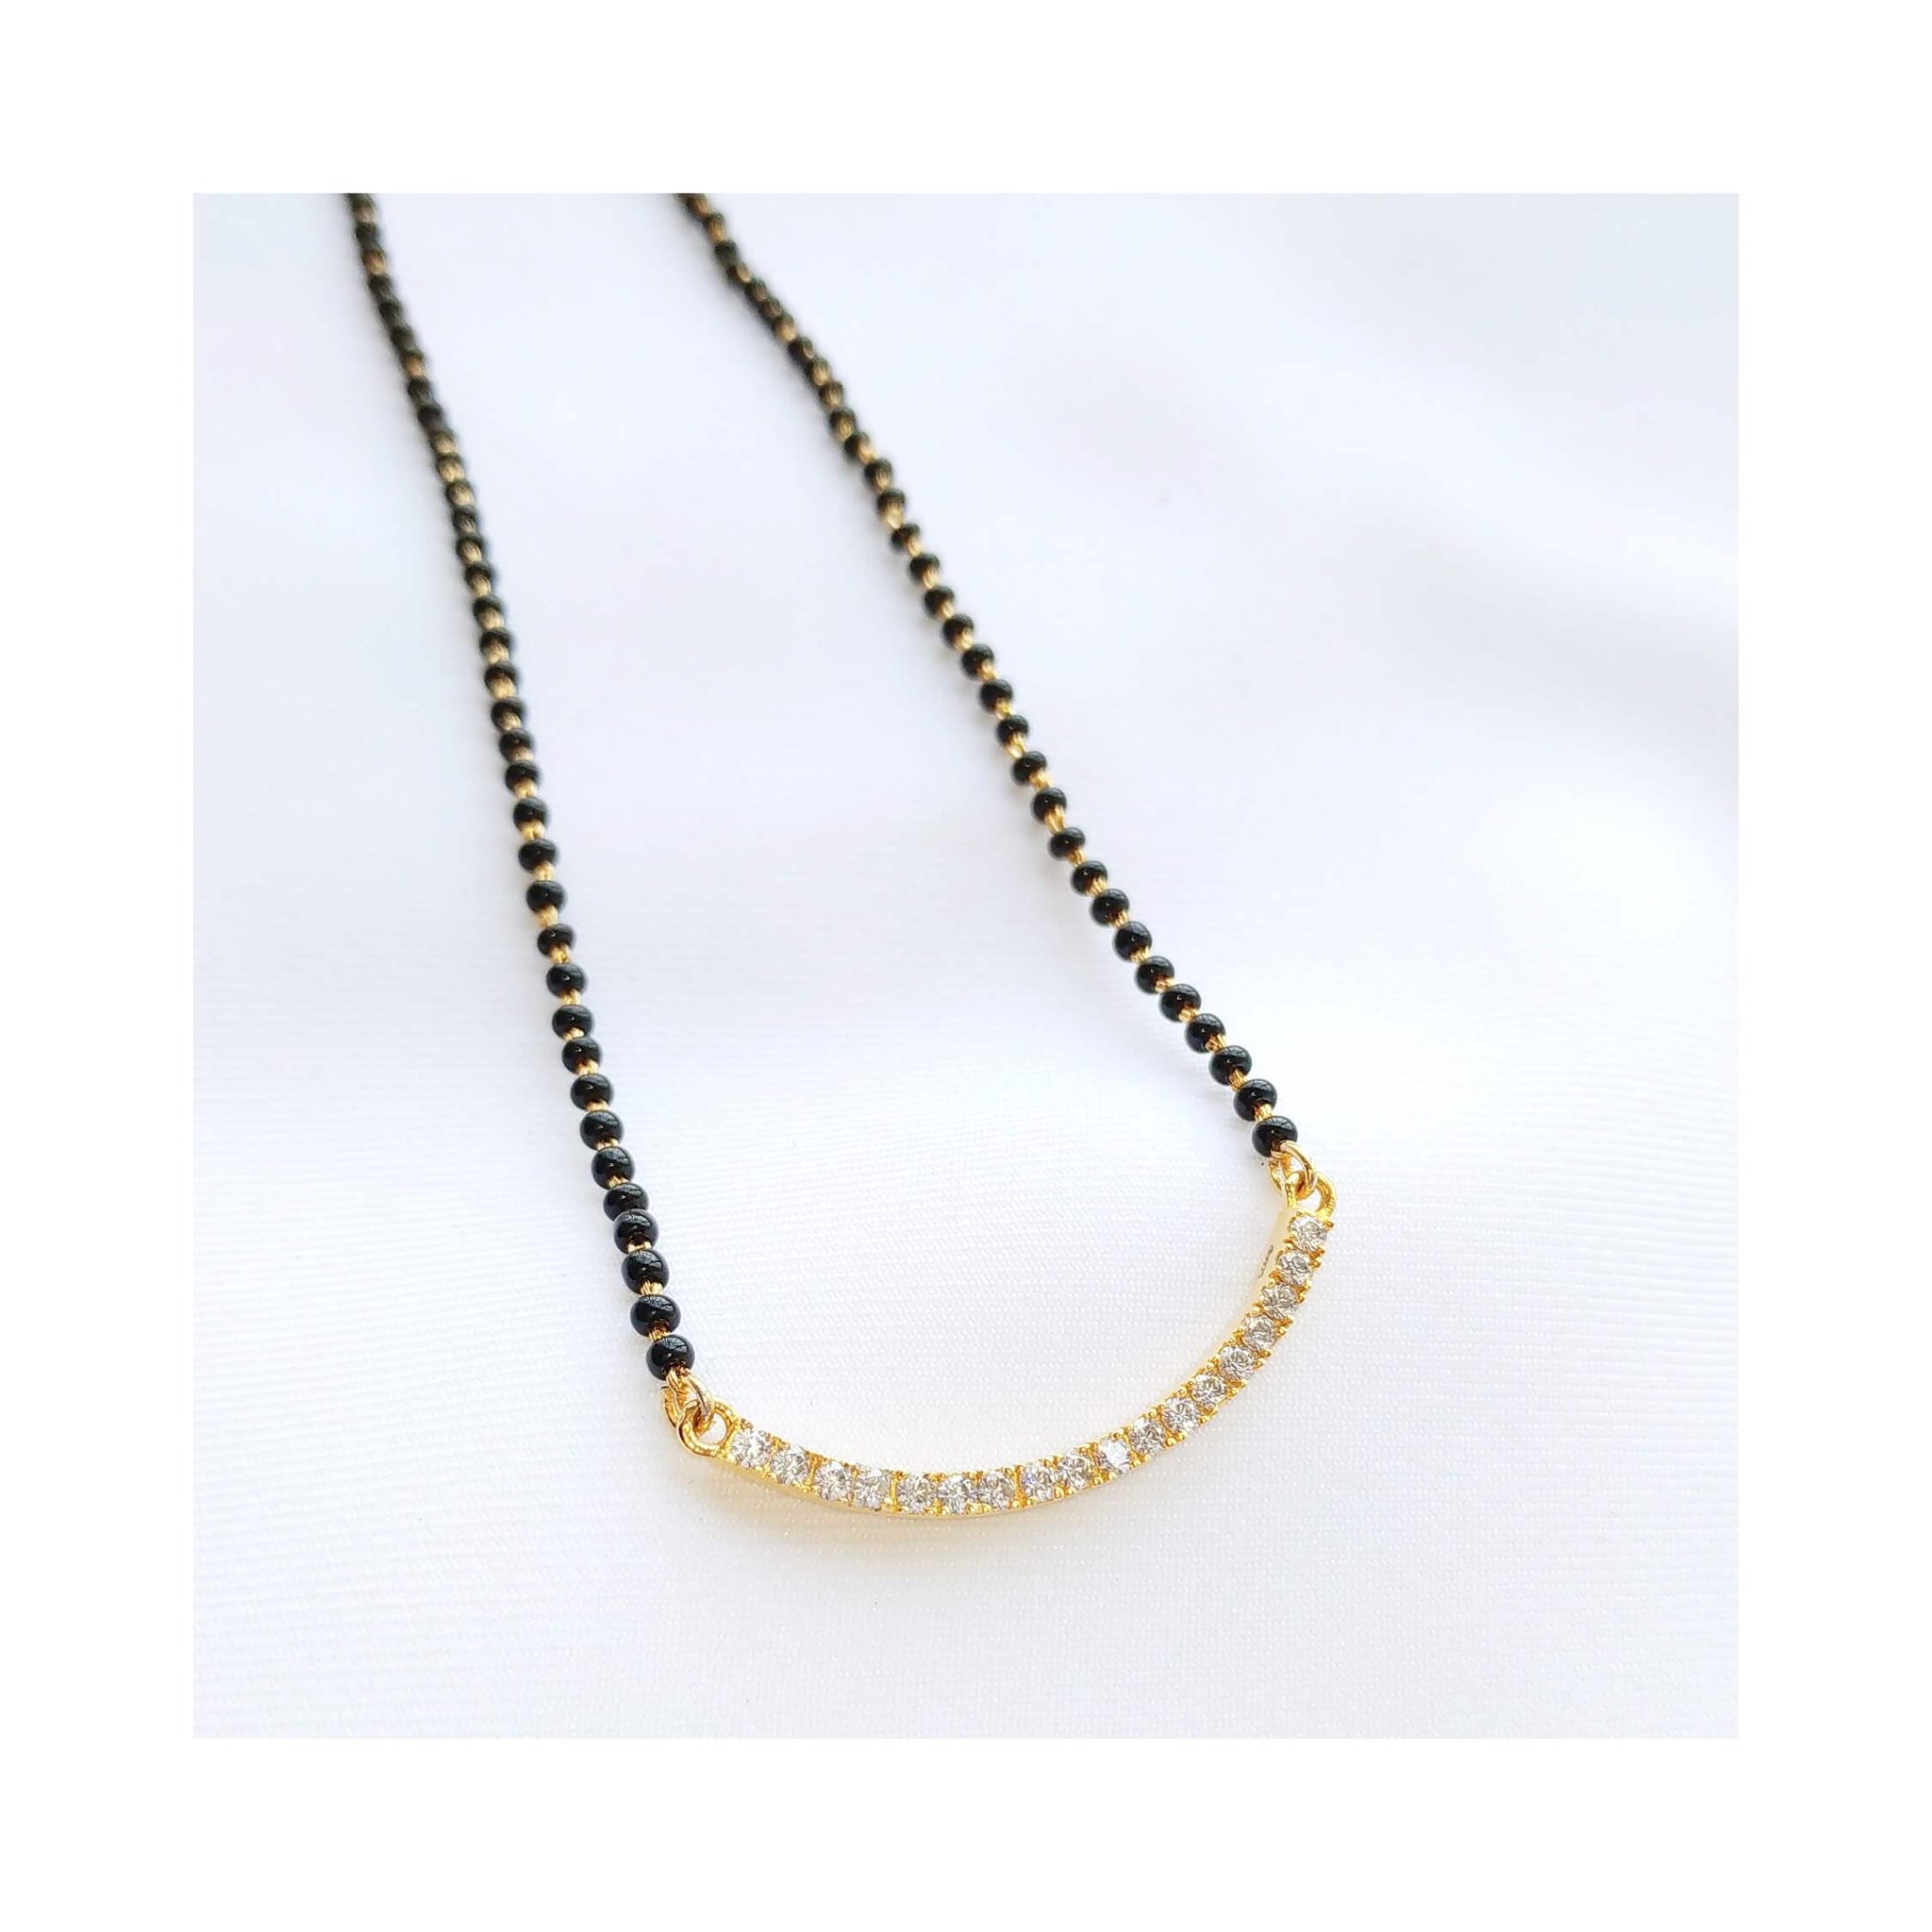 The Smile Sutra Neck Mangalsutra